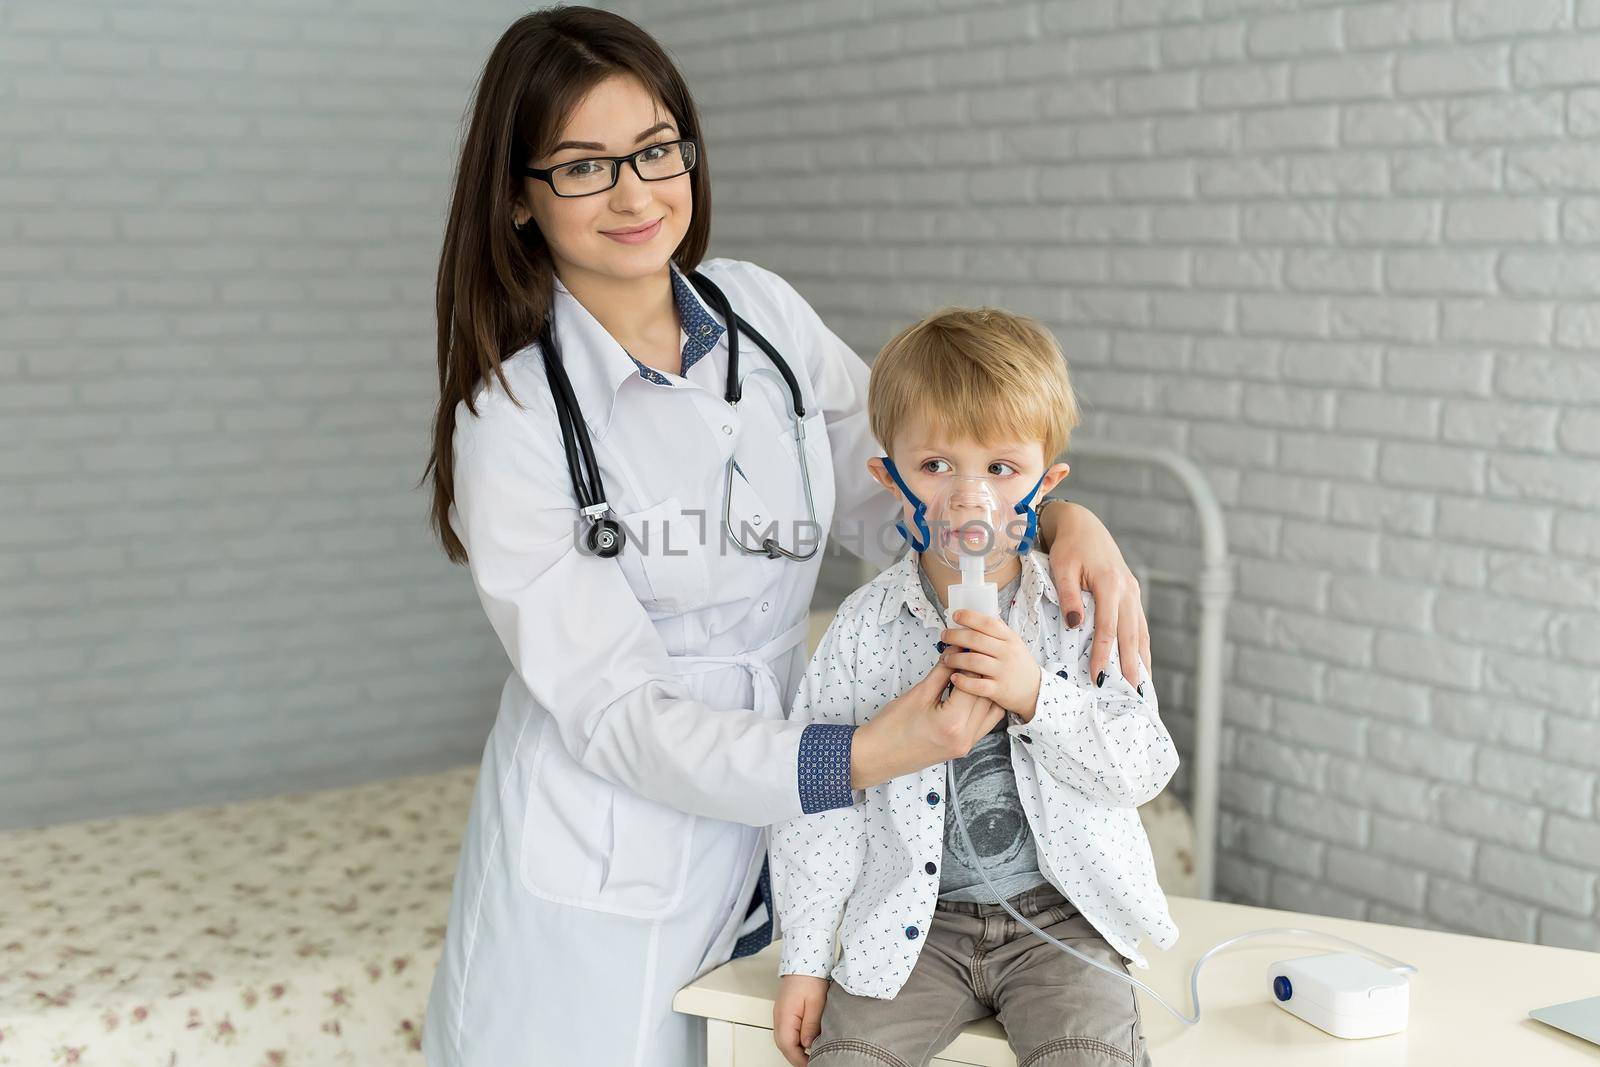 Medical doctor applying medicine inhalation treatment on a little boy with asthma inhalation therapy by the mask of inhaler.